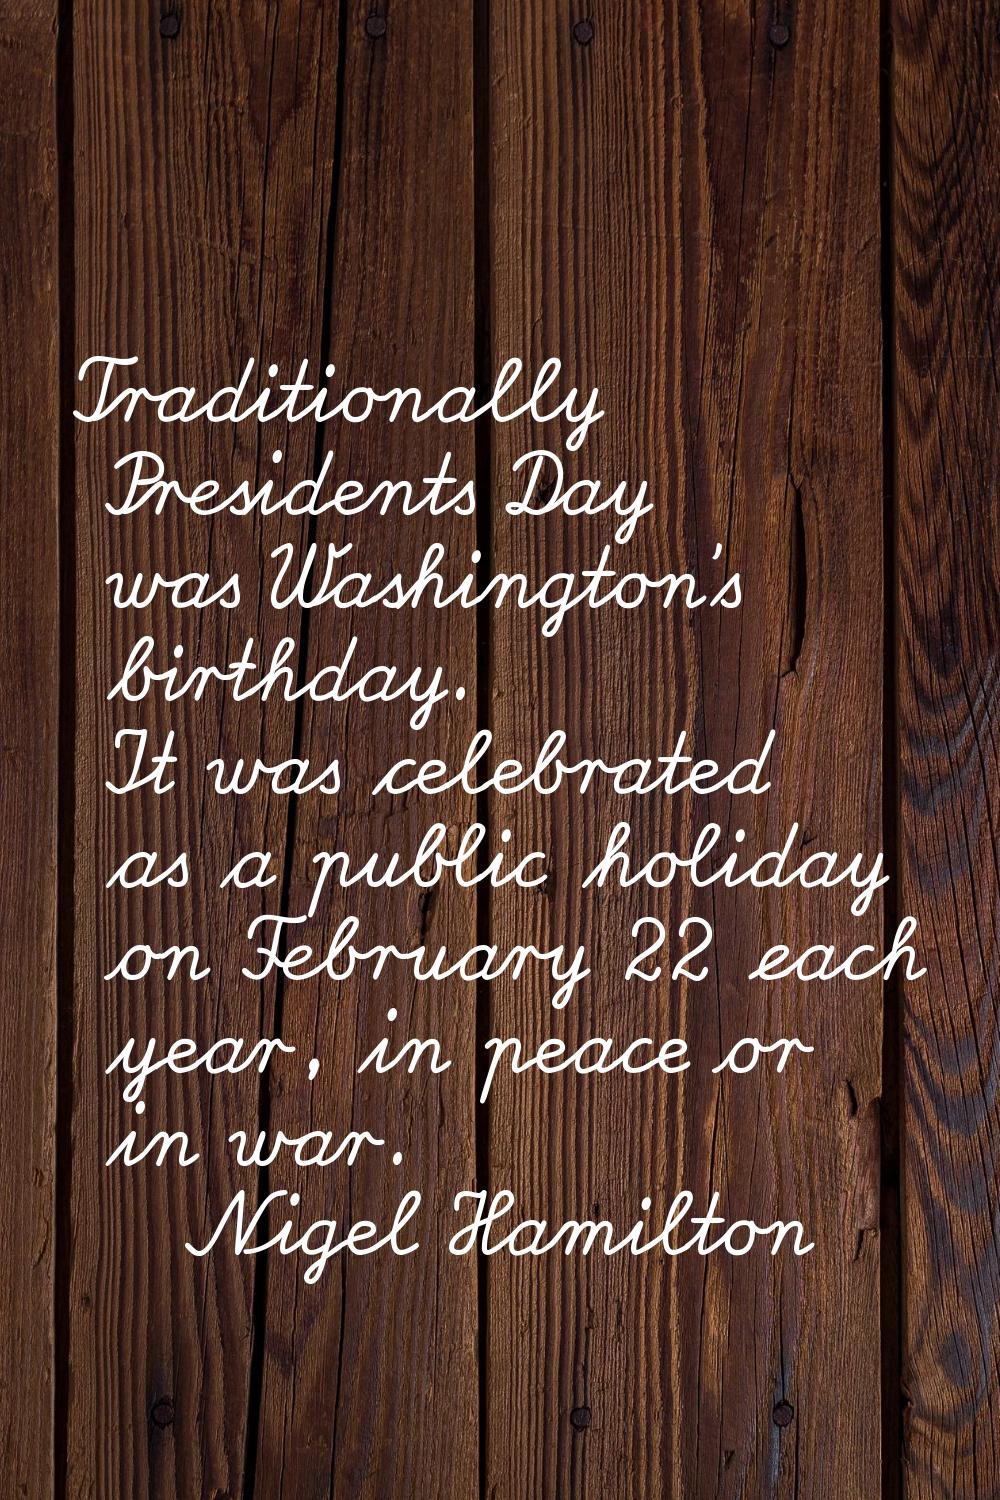 Traditionally Presidents Day was Washington's birthday. It was celebrated as a public holiday on Fe